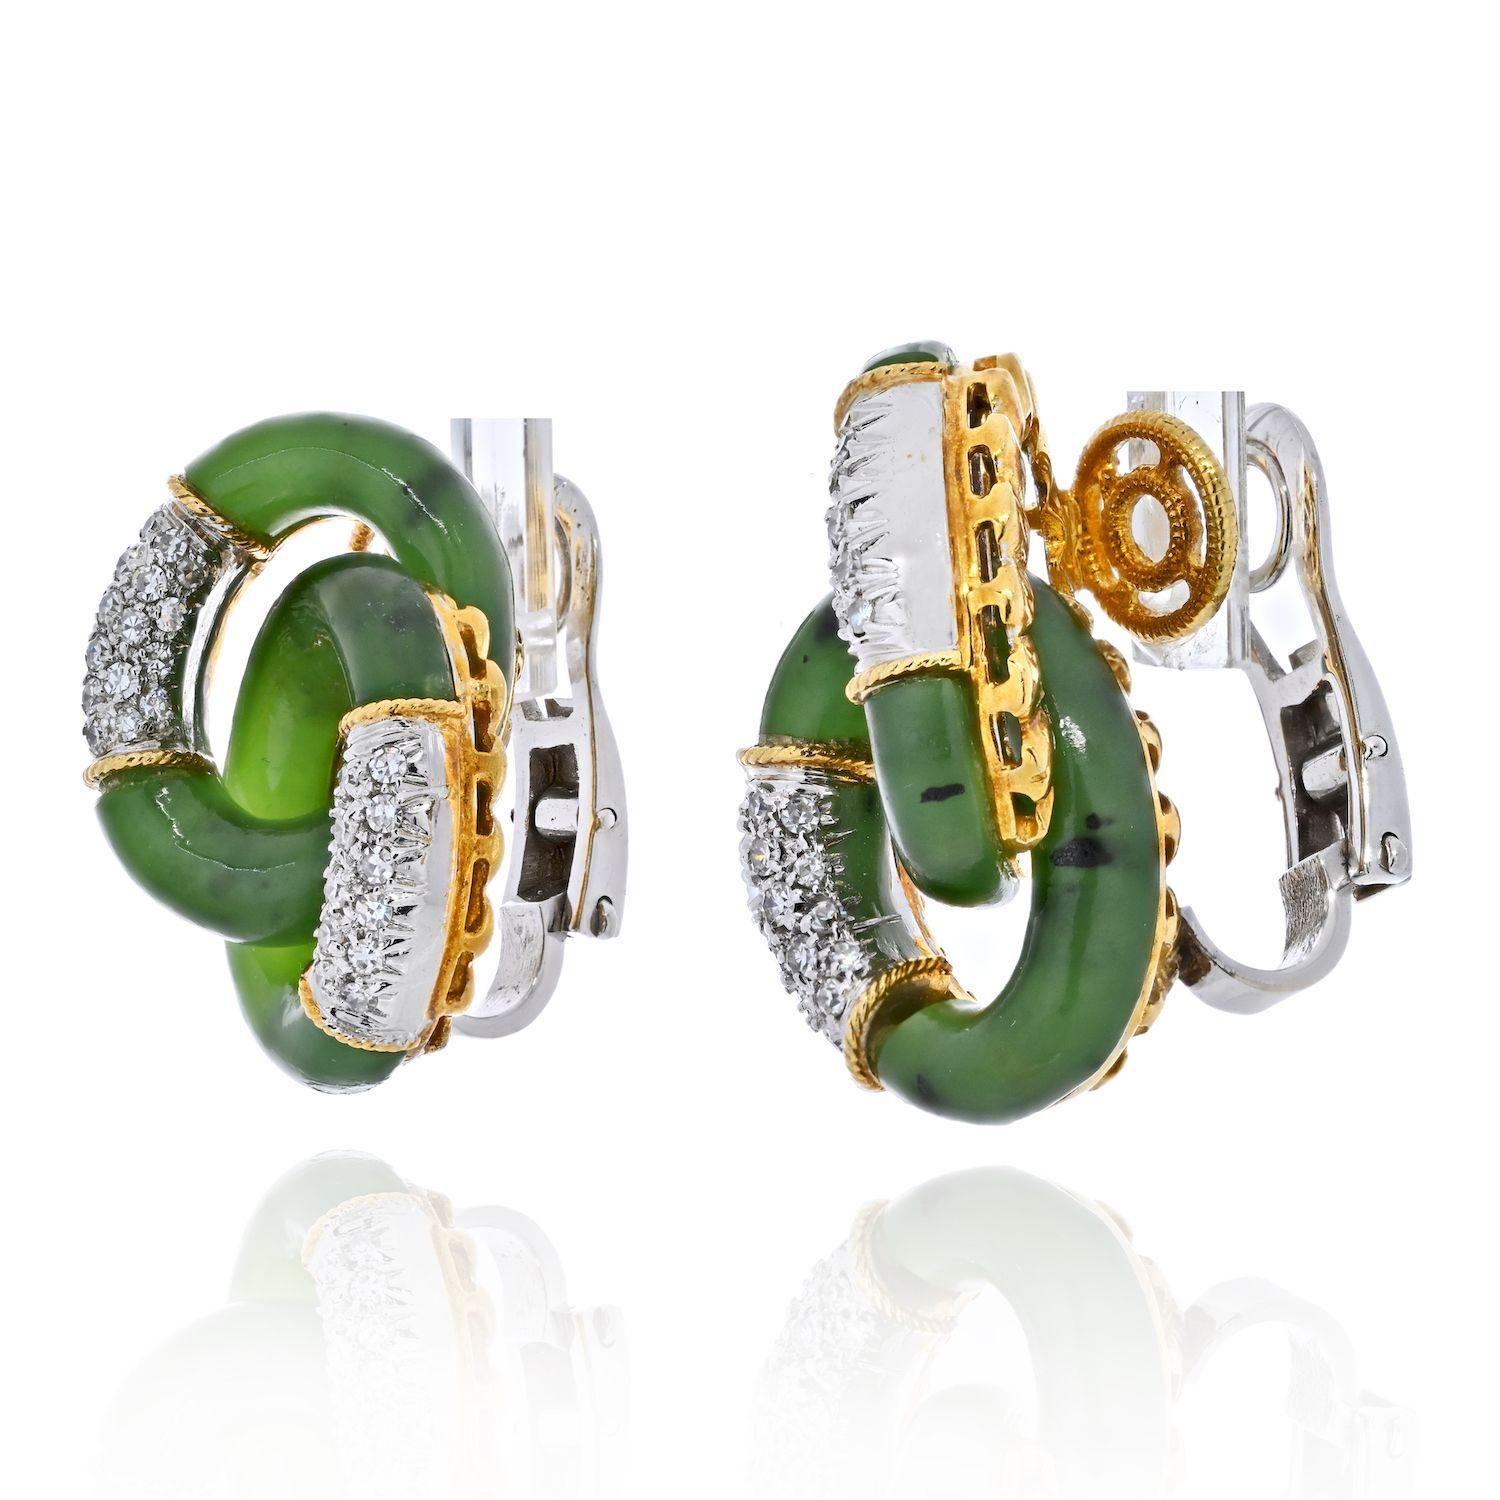 Simple in design yet timeless these vintage interlocking hoop earrings are crafted in 18k yellow gold, with diamonds upon platinum. 
Jade is of natural green color, very earthy feel. 
These earrings are about 1 inch long. 
We can see today's modern